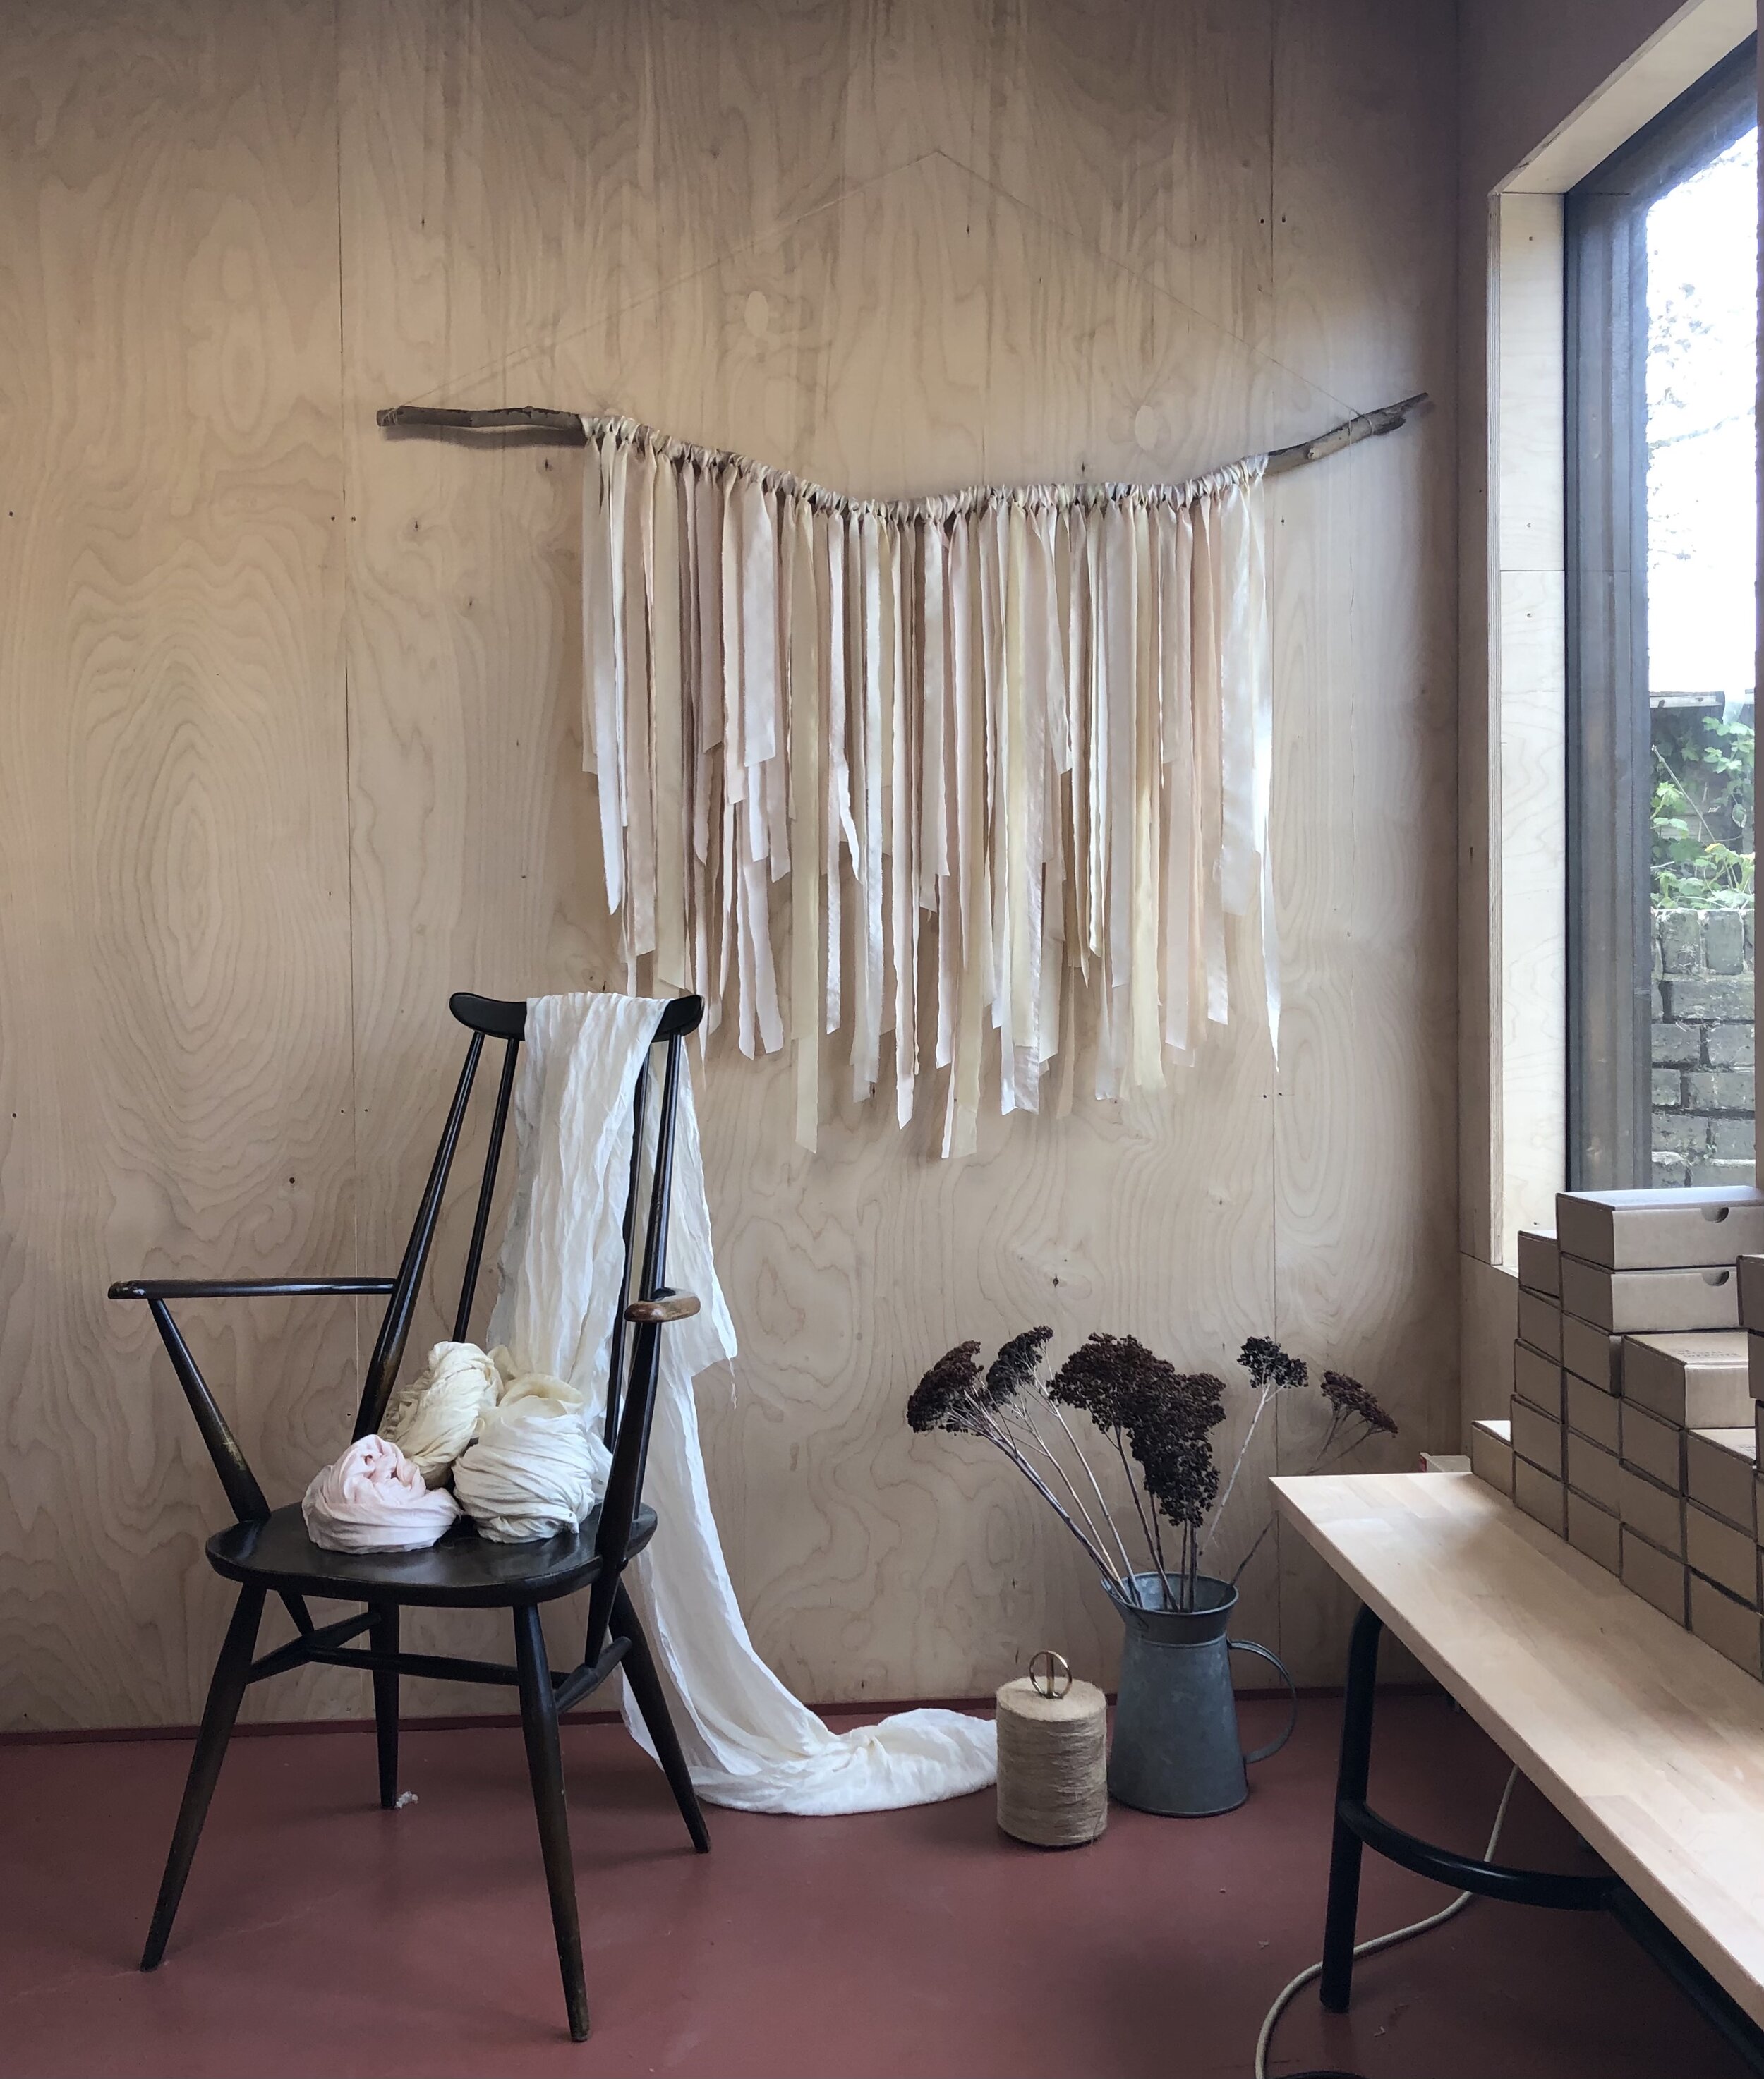 91 Magazine's Meet The Maker - The Natural Dyeworks